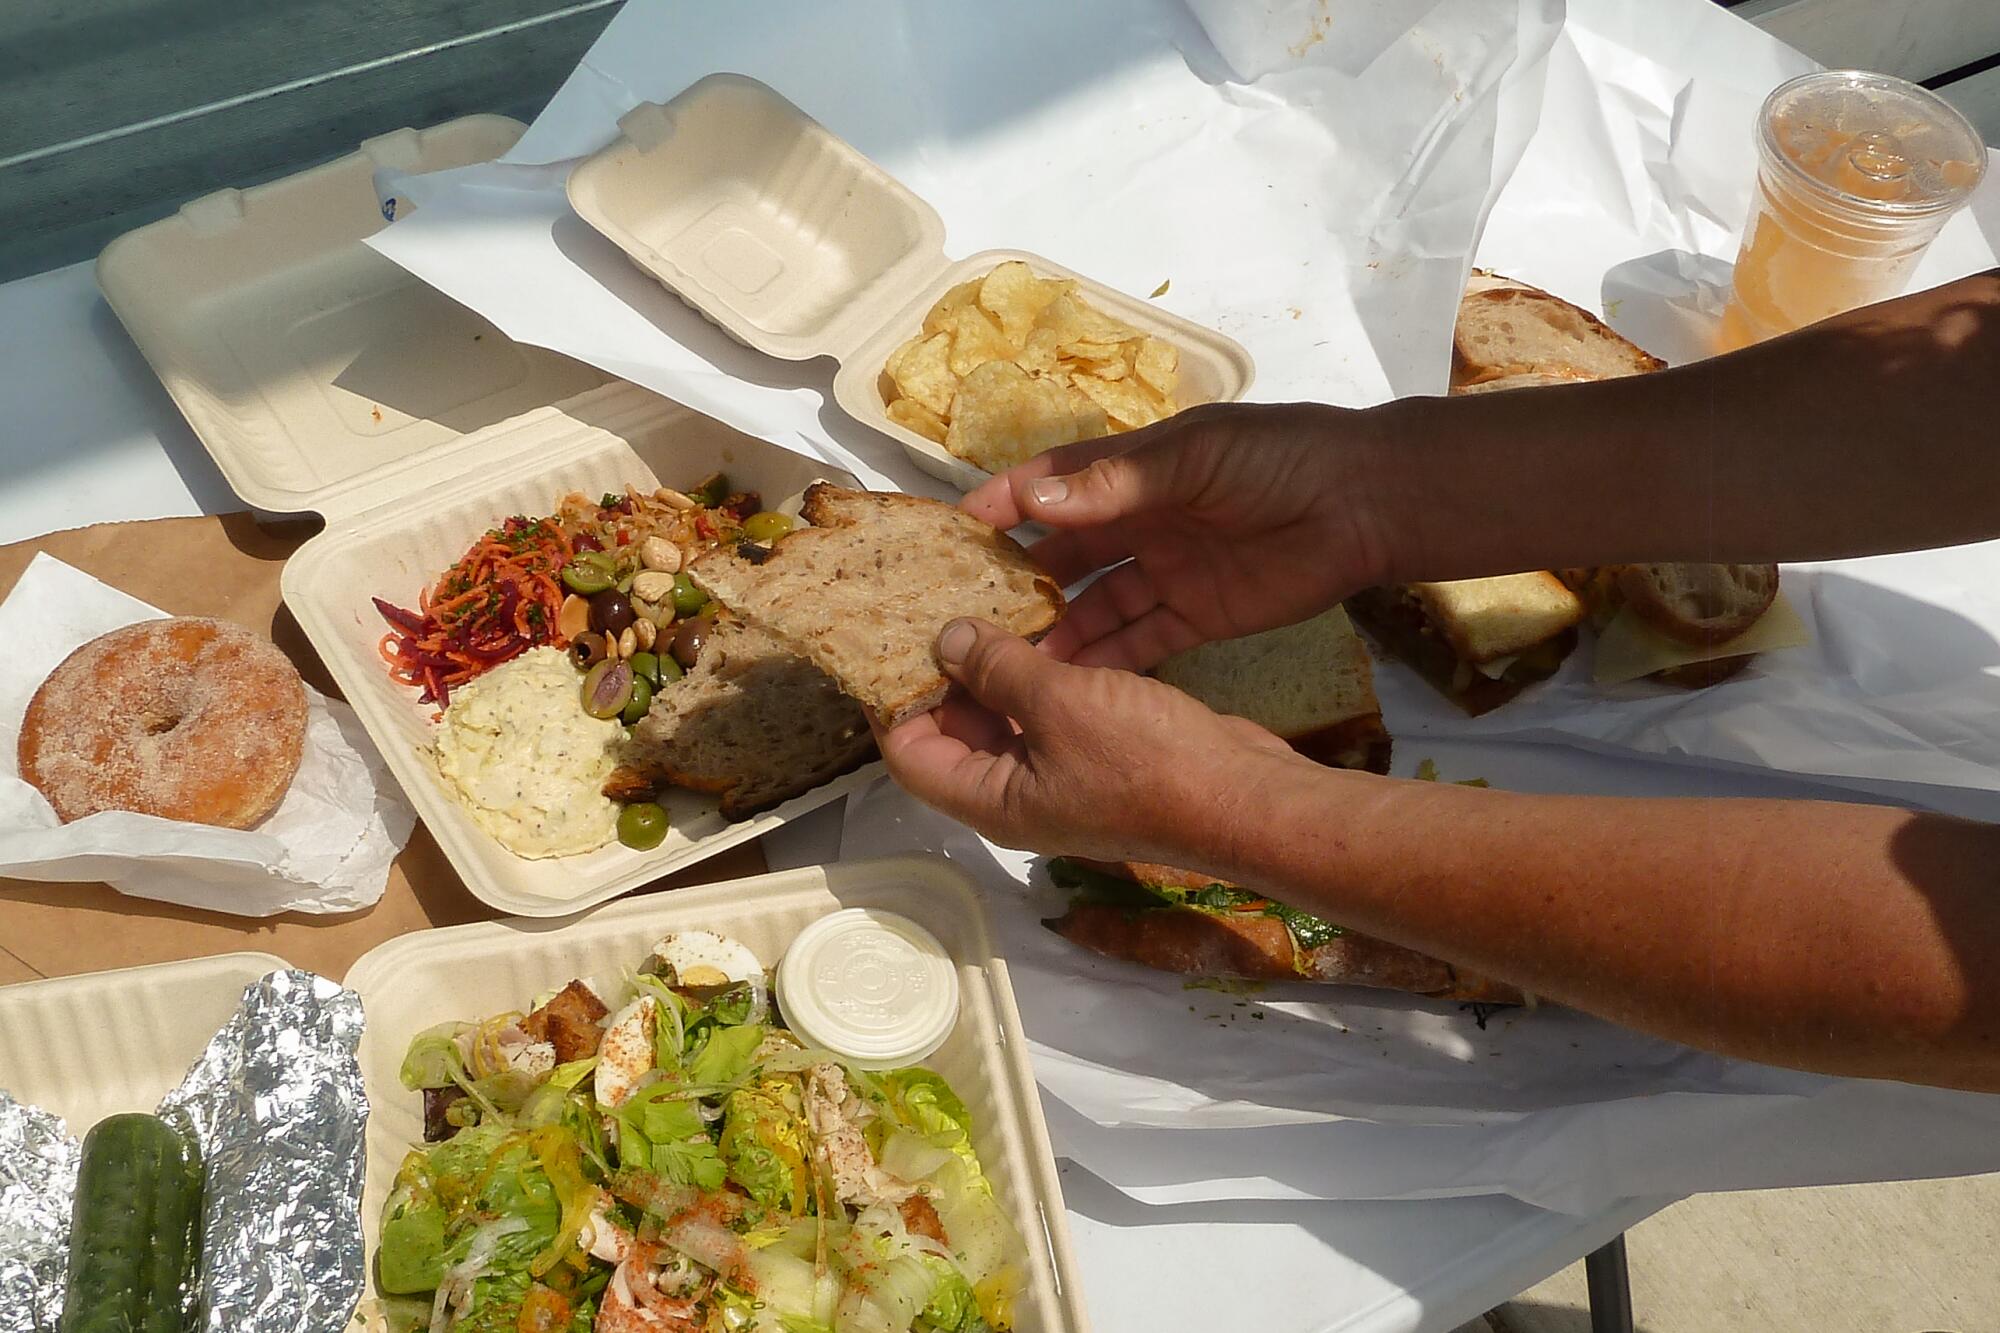 Takeaway containers hold bread and salads.